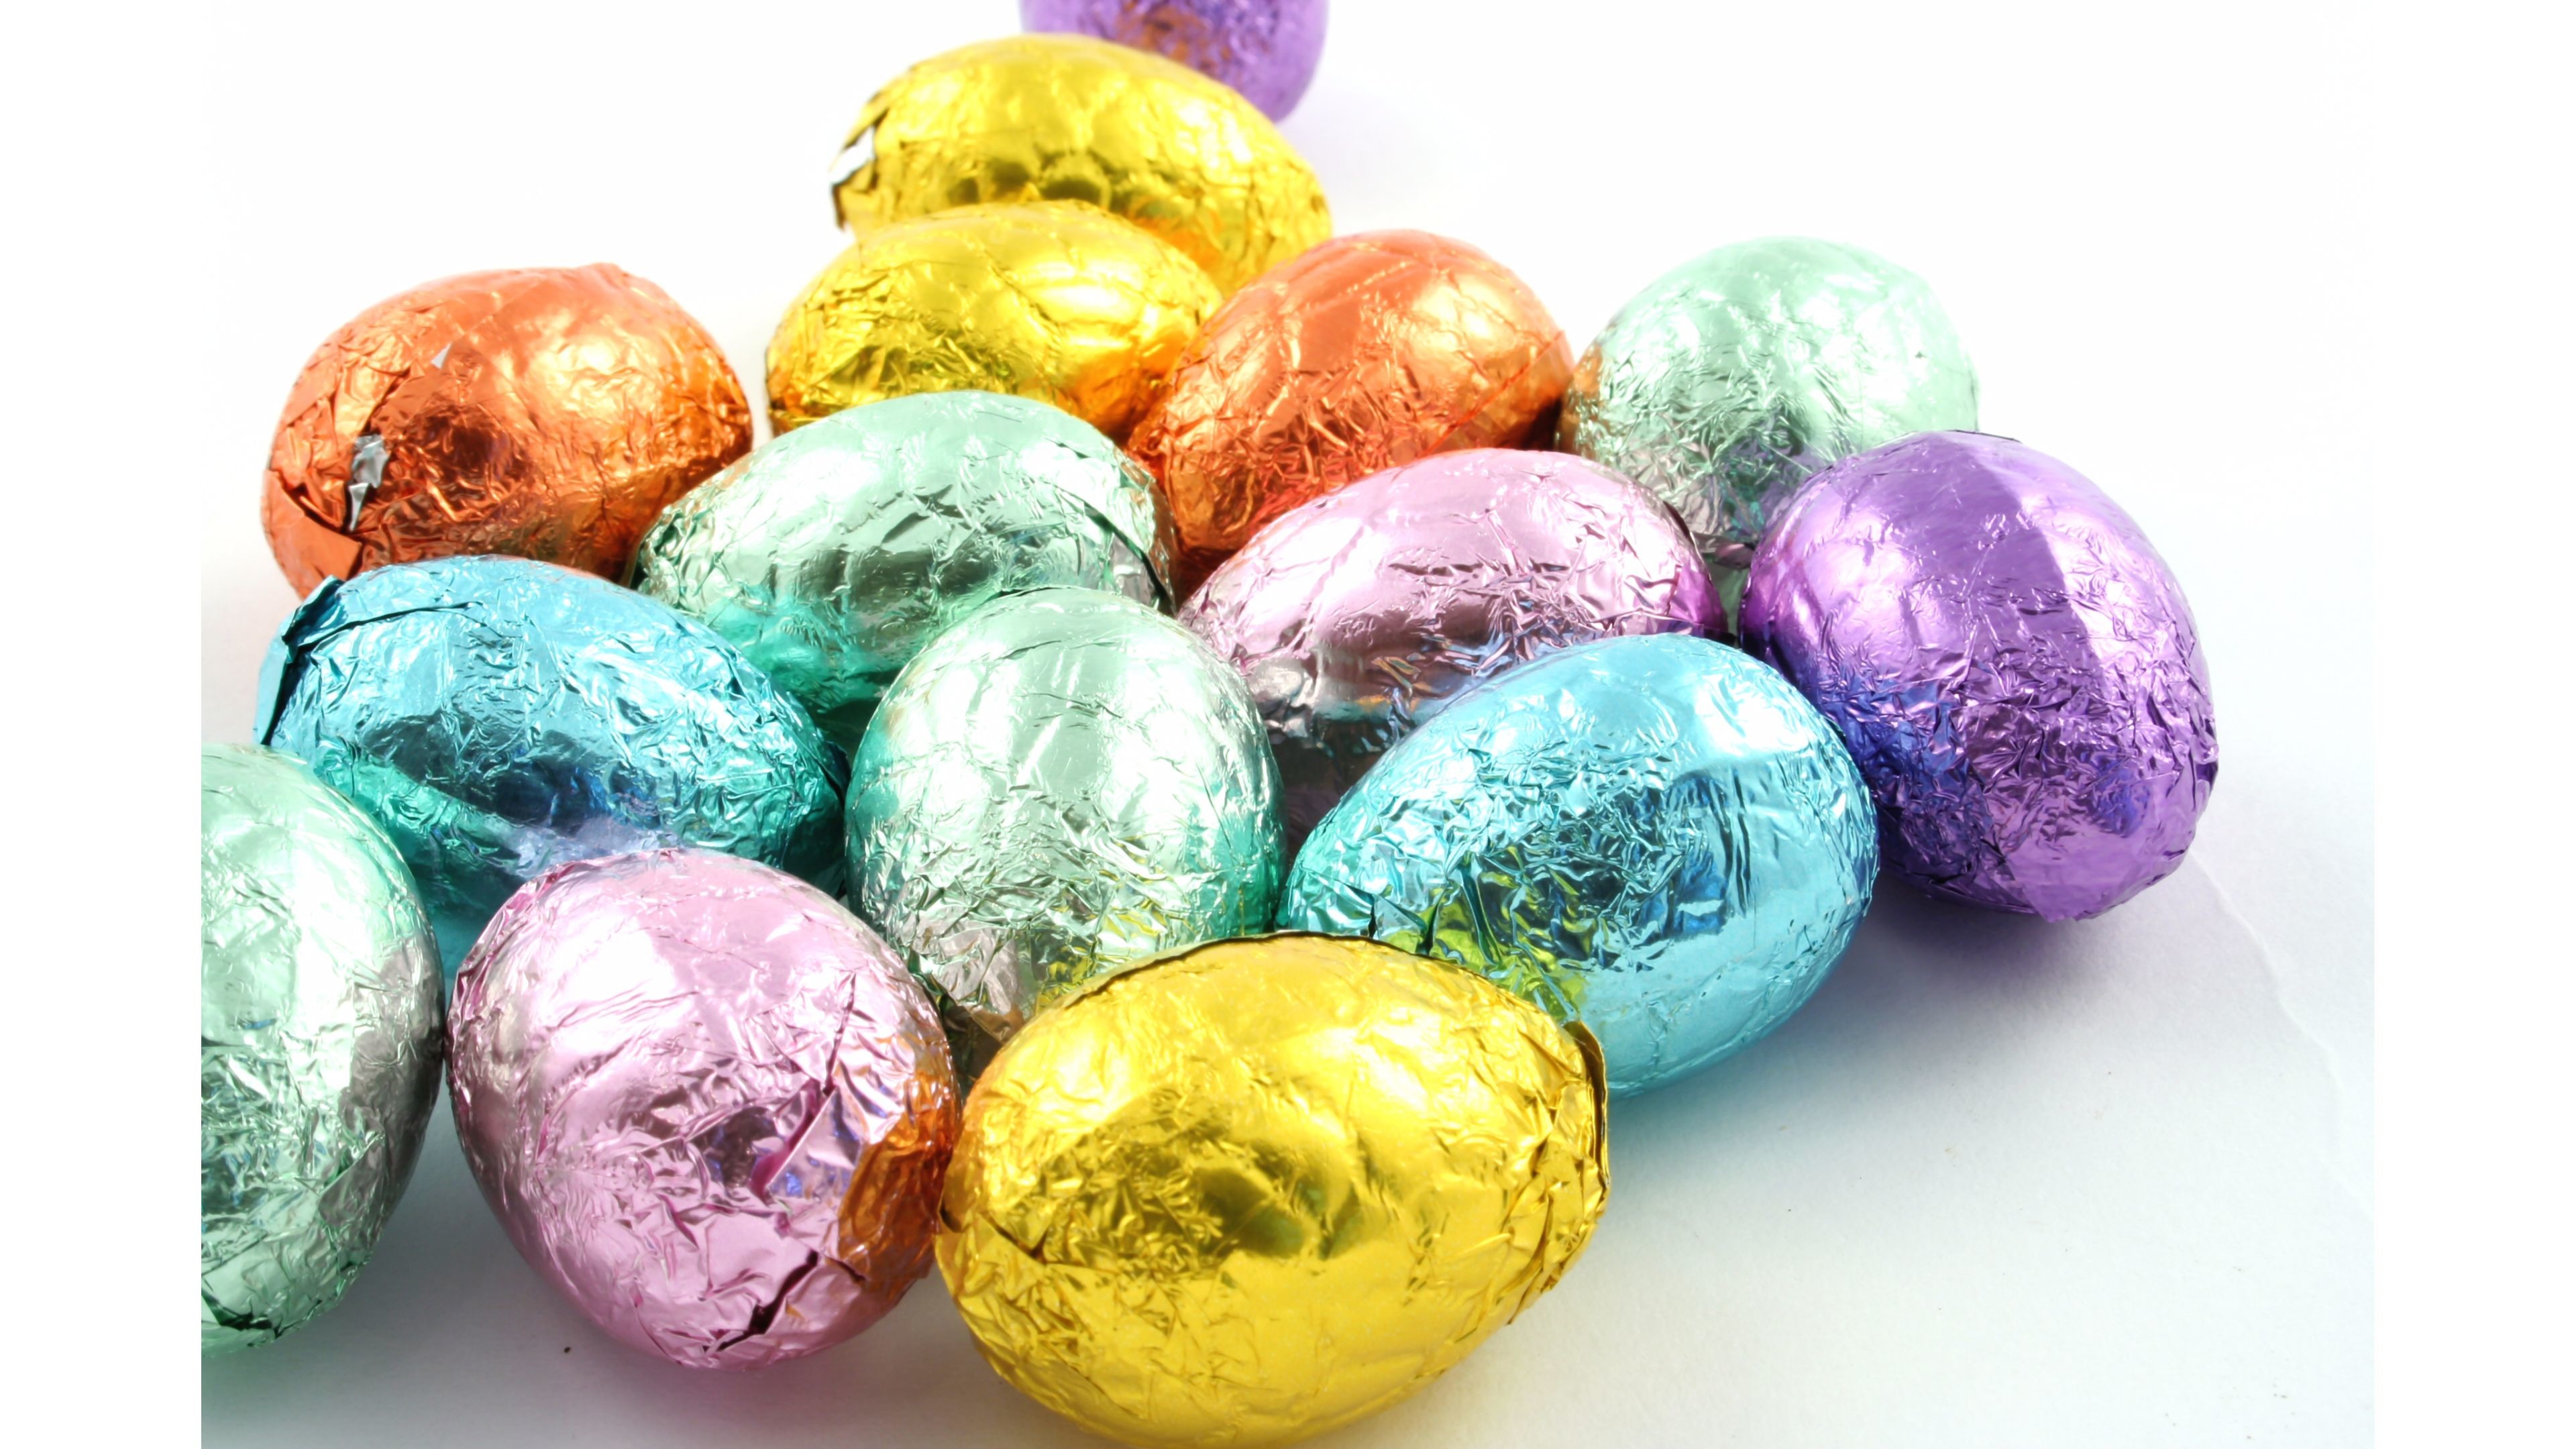 Chocolate Candy Happy Easter 4k Wallpapers 
 Data Src - Easter Eggs White Background - HD Wallpaper 